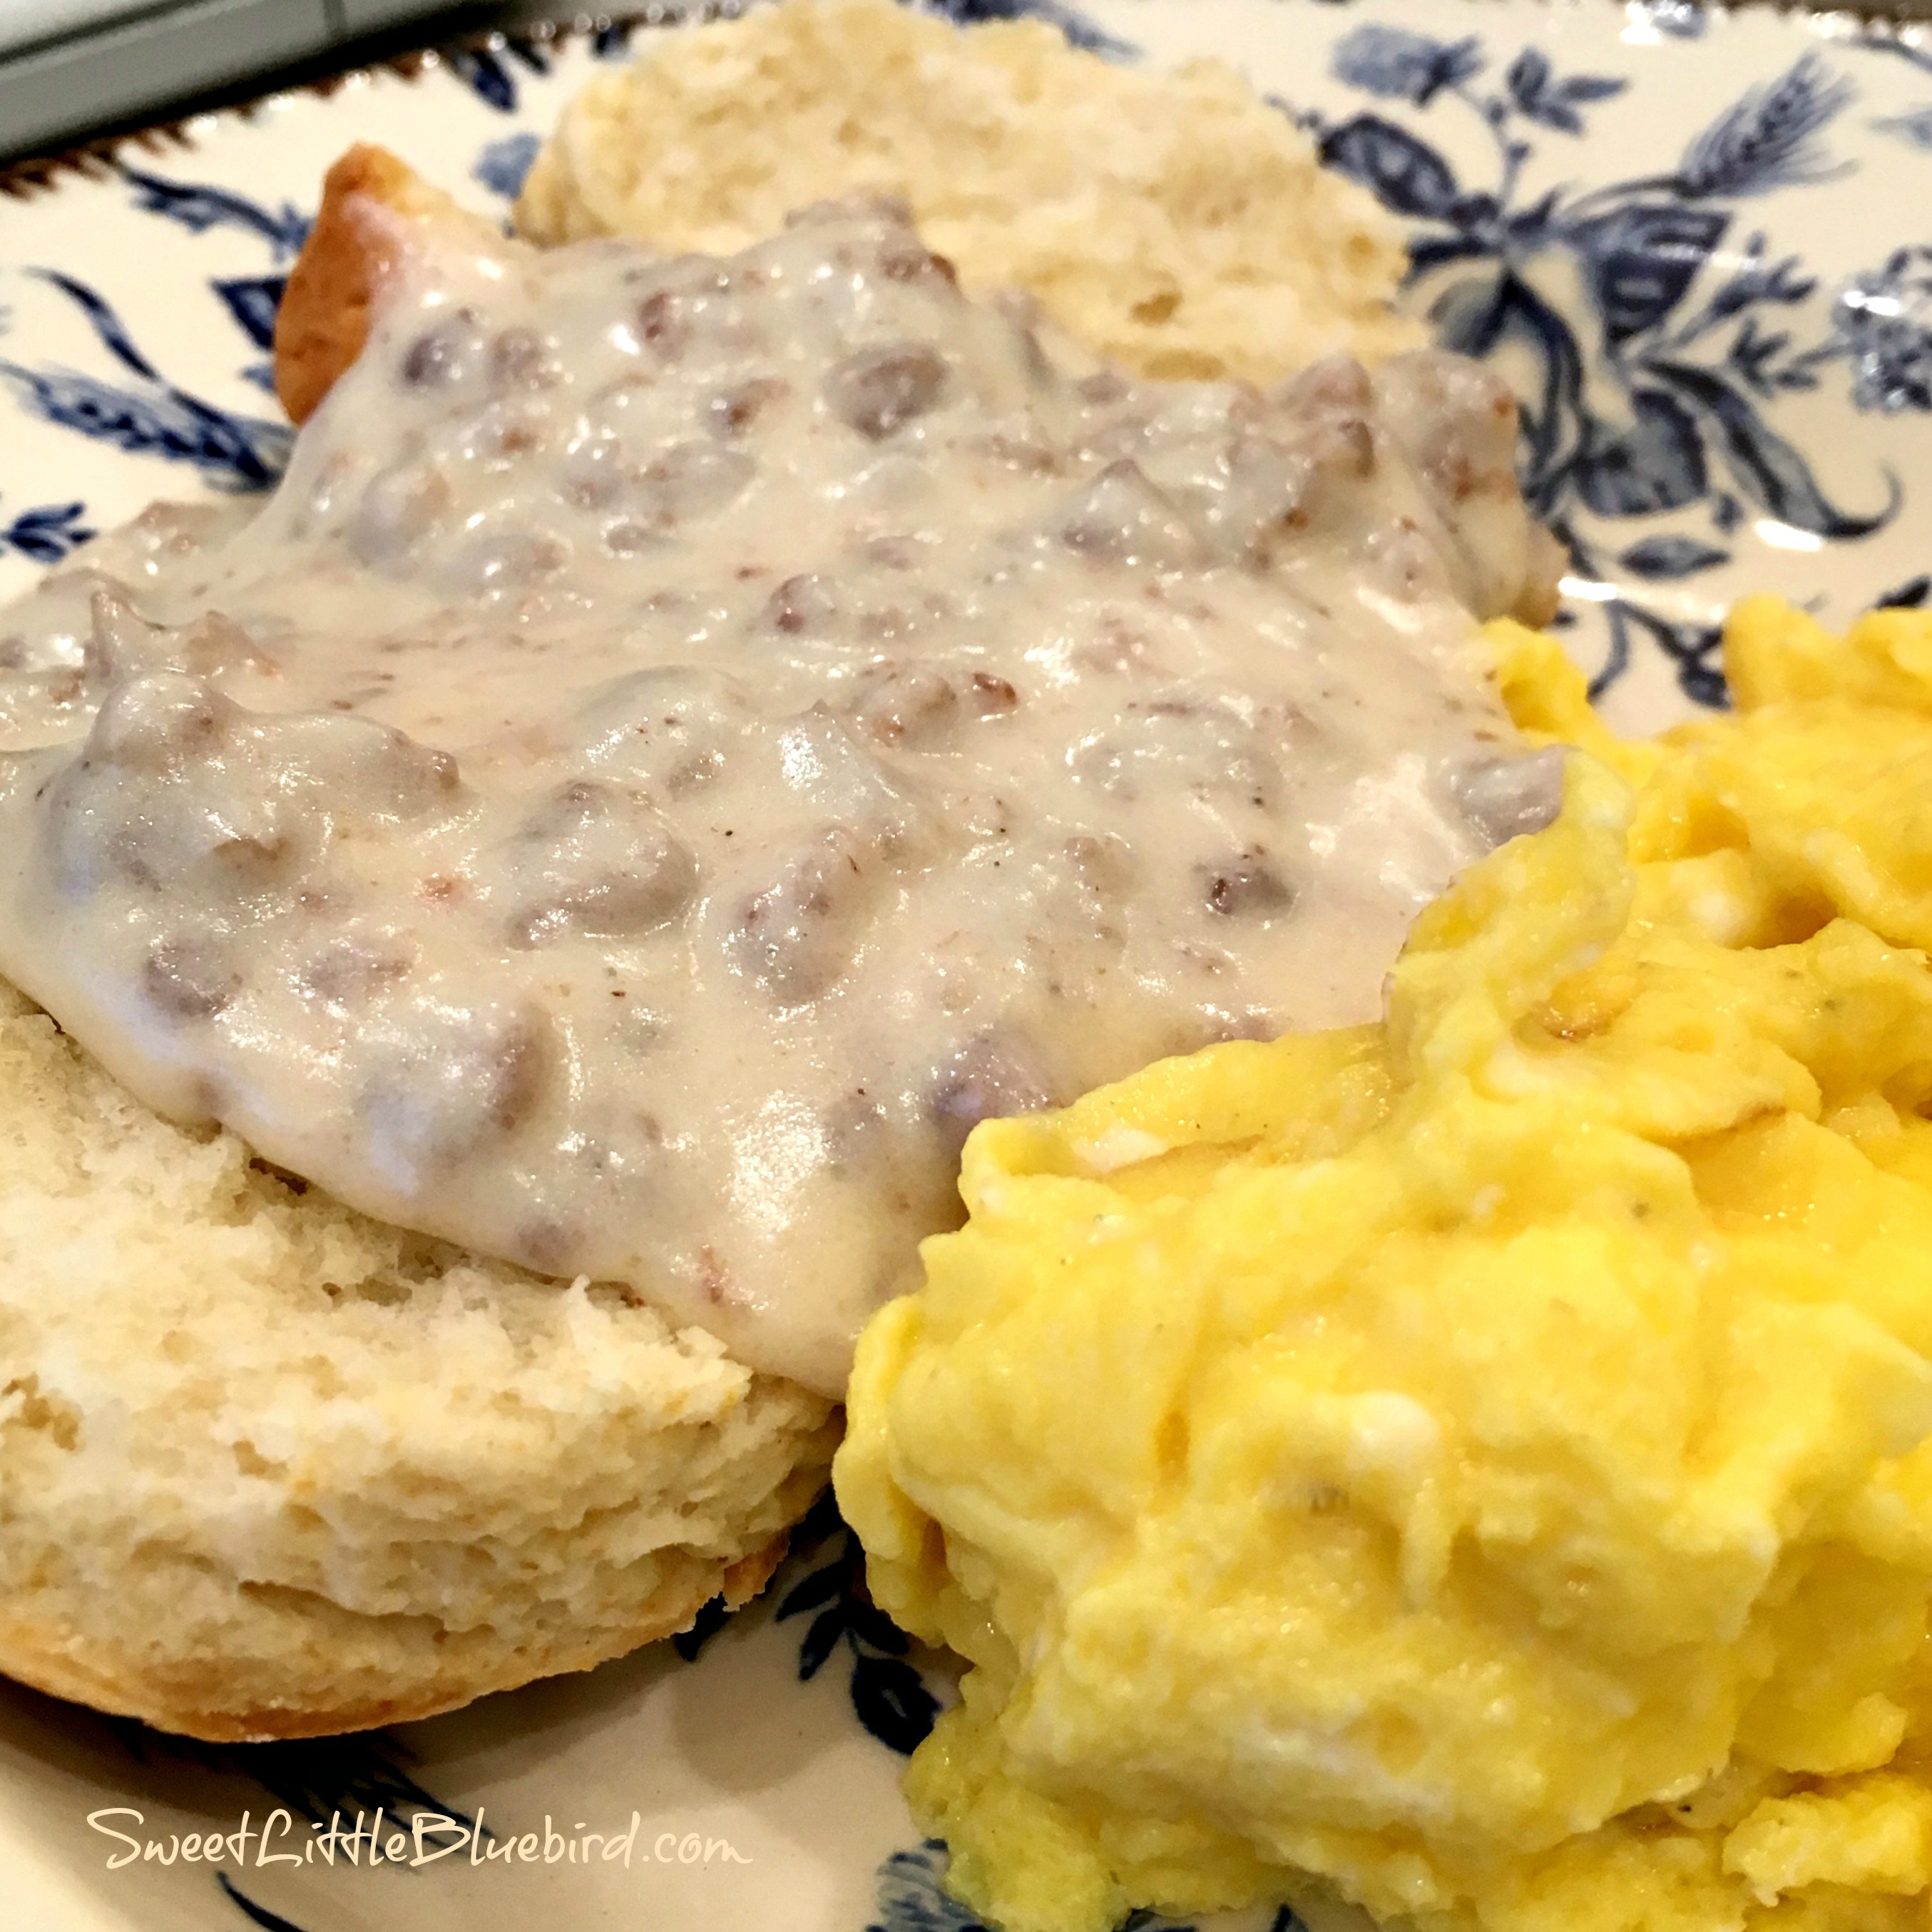 Quick Easy Sausage Gravy And Biscuits Sweet Little Bluebird,Convert 23 Cup To Ml